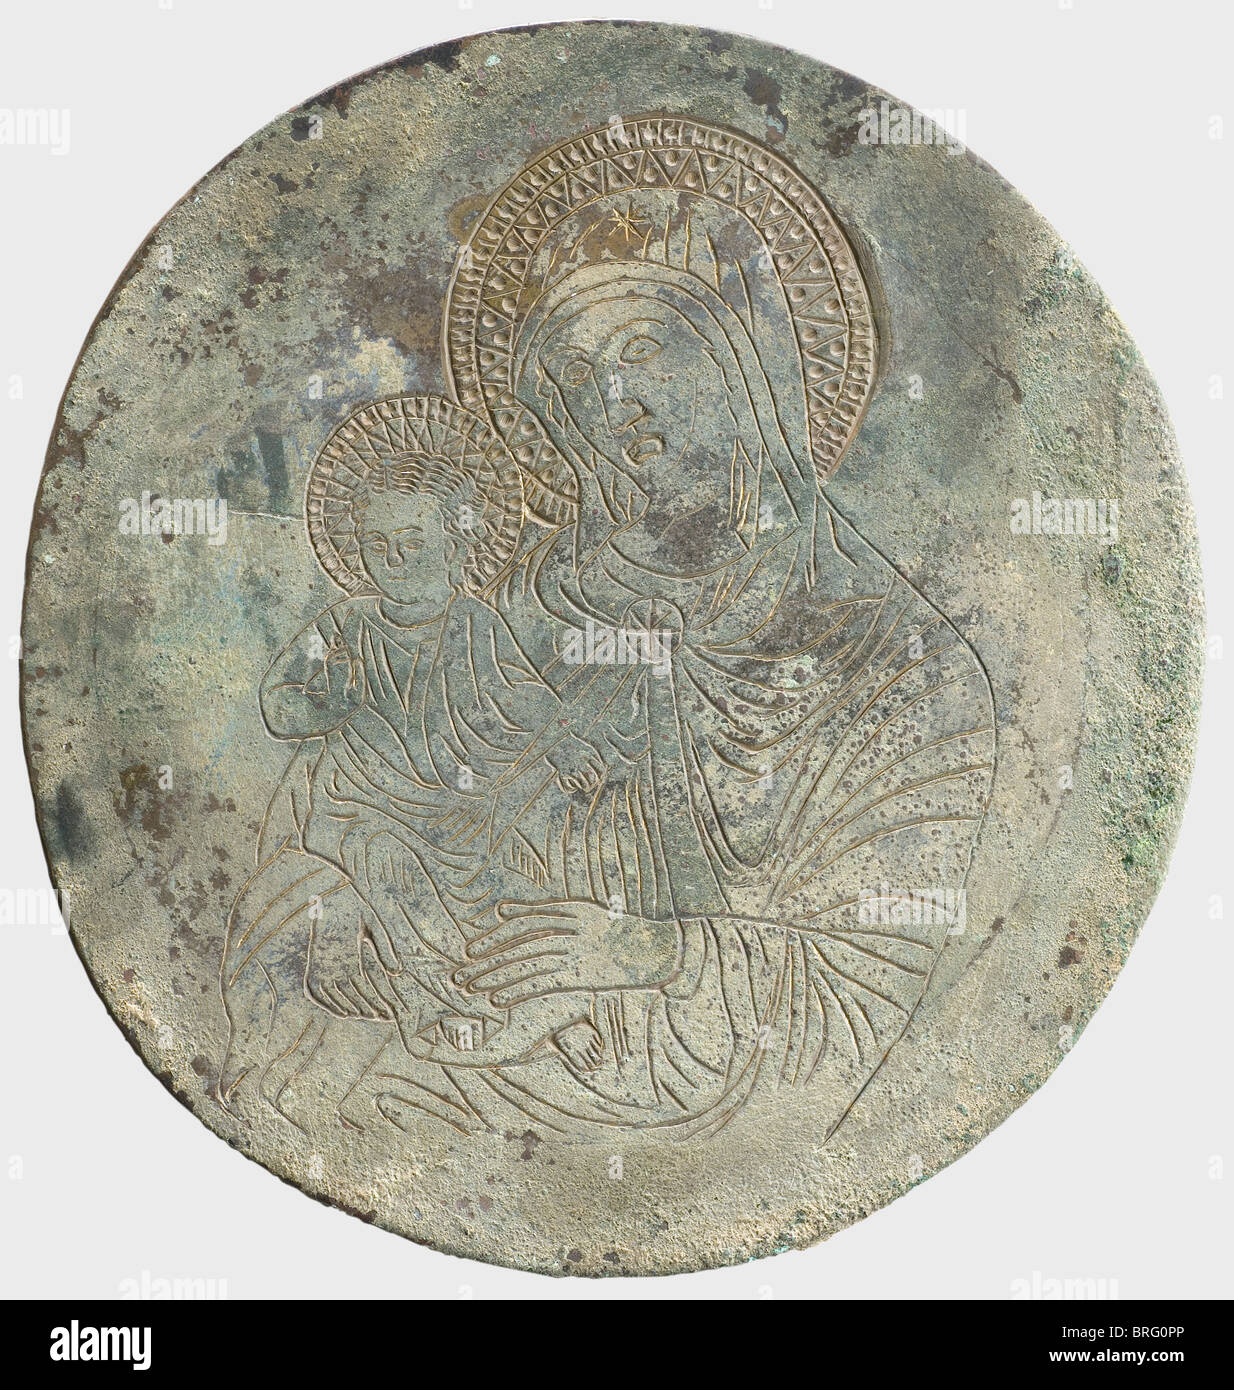 A late Byzantine picture of Mary, 13th/14th century, A.C. Bronze with a heavy greenish patina. Heavy, slightly oval disk with a finely engraved depiction of the Virgin Mother with the Christ Child and nimbus. Cleaned excavation discovery. Height 17 cm. historic, historical, 14th century, 13th century, Middle Ages, medieval, mediaeval, Byzantine Empire, Byzantium, clipping, cut out, cut-out, cut-outs, Additional-Rights-Clearences-Not Available Stock Photo